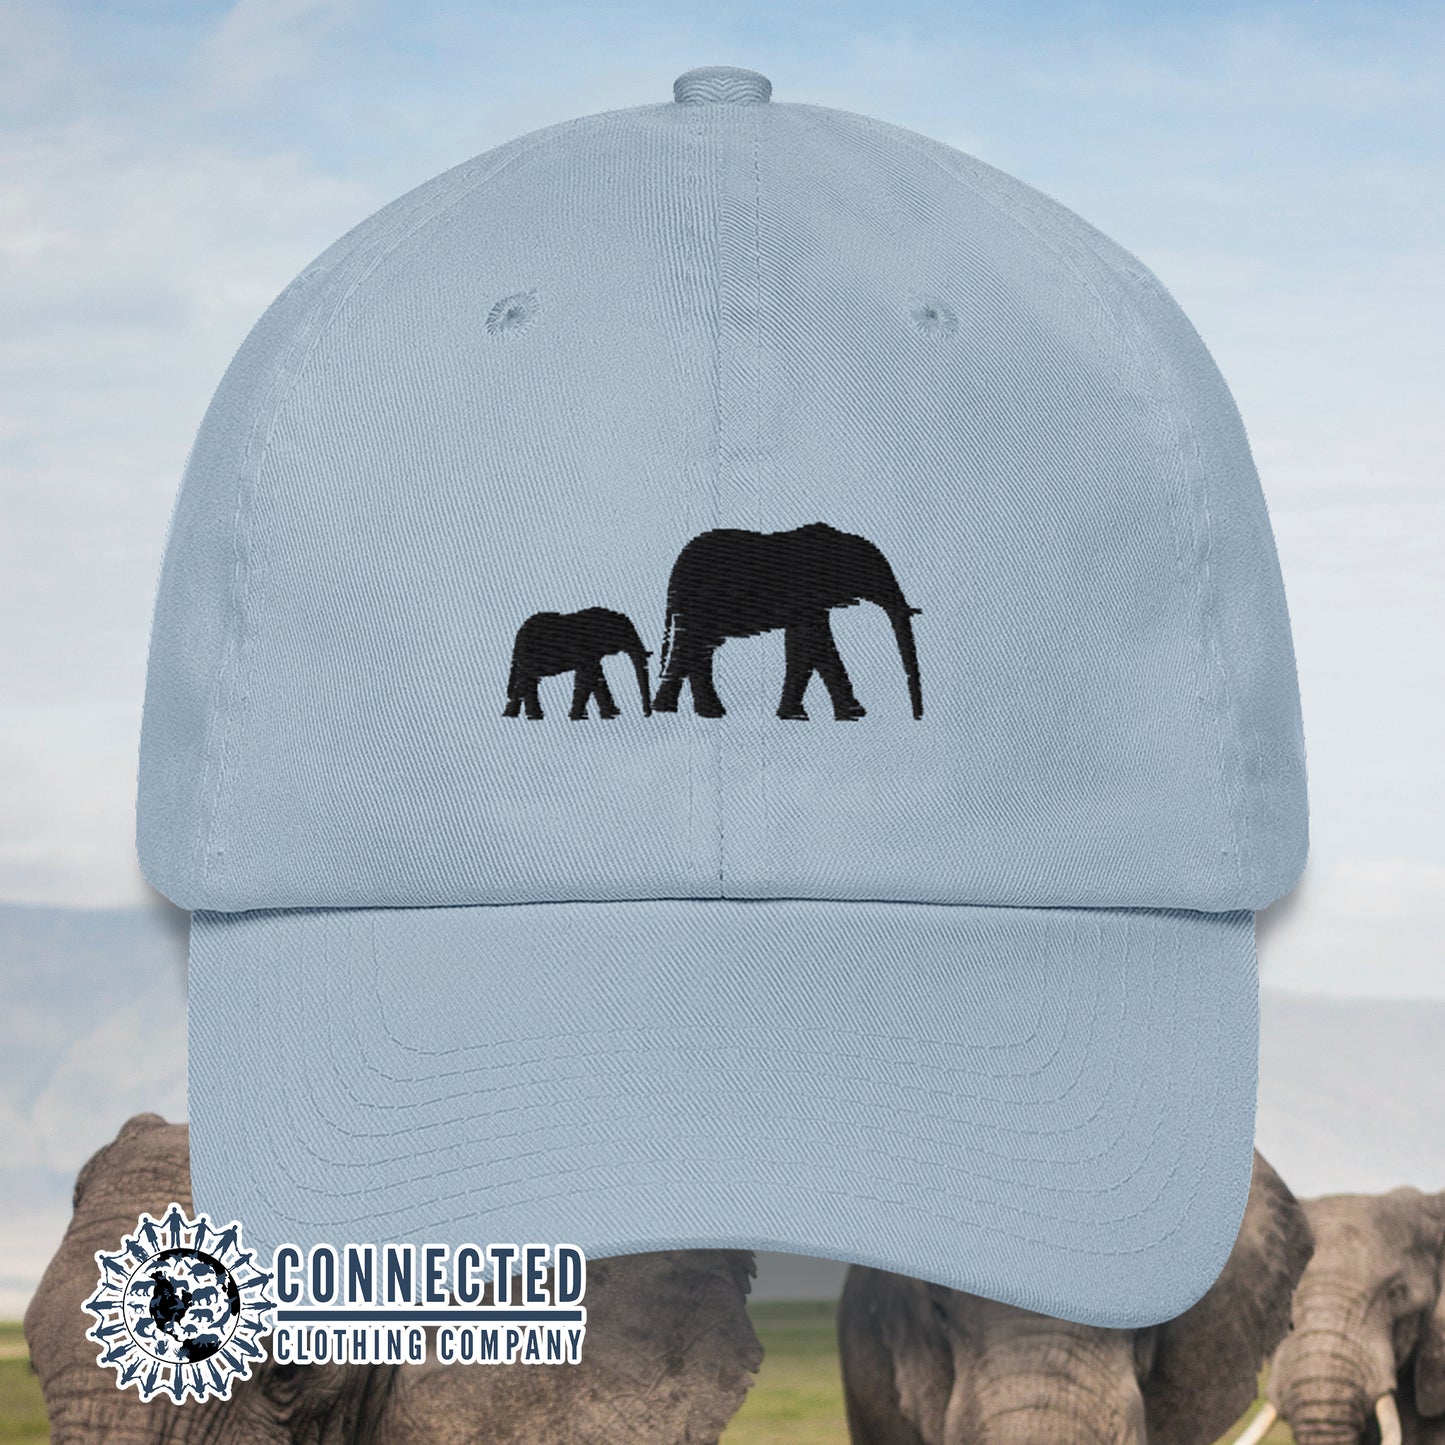 Blue Elephant Eco Friendly Cotton Cap - Connected Clothing Company - 10% of profits donated to elephant conservation